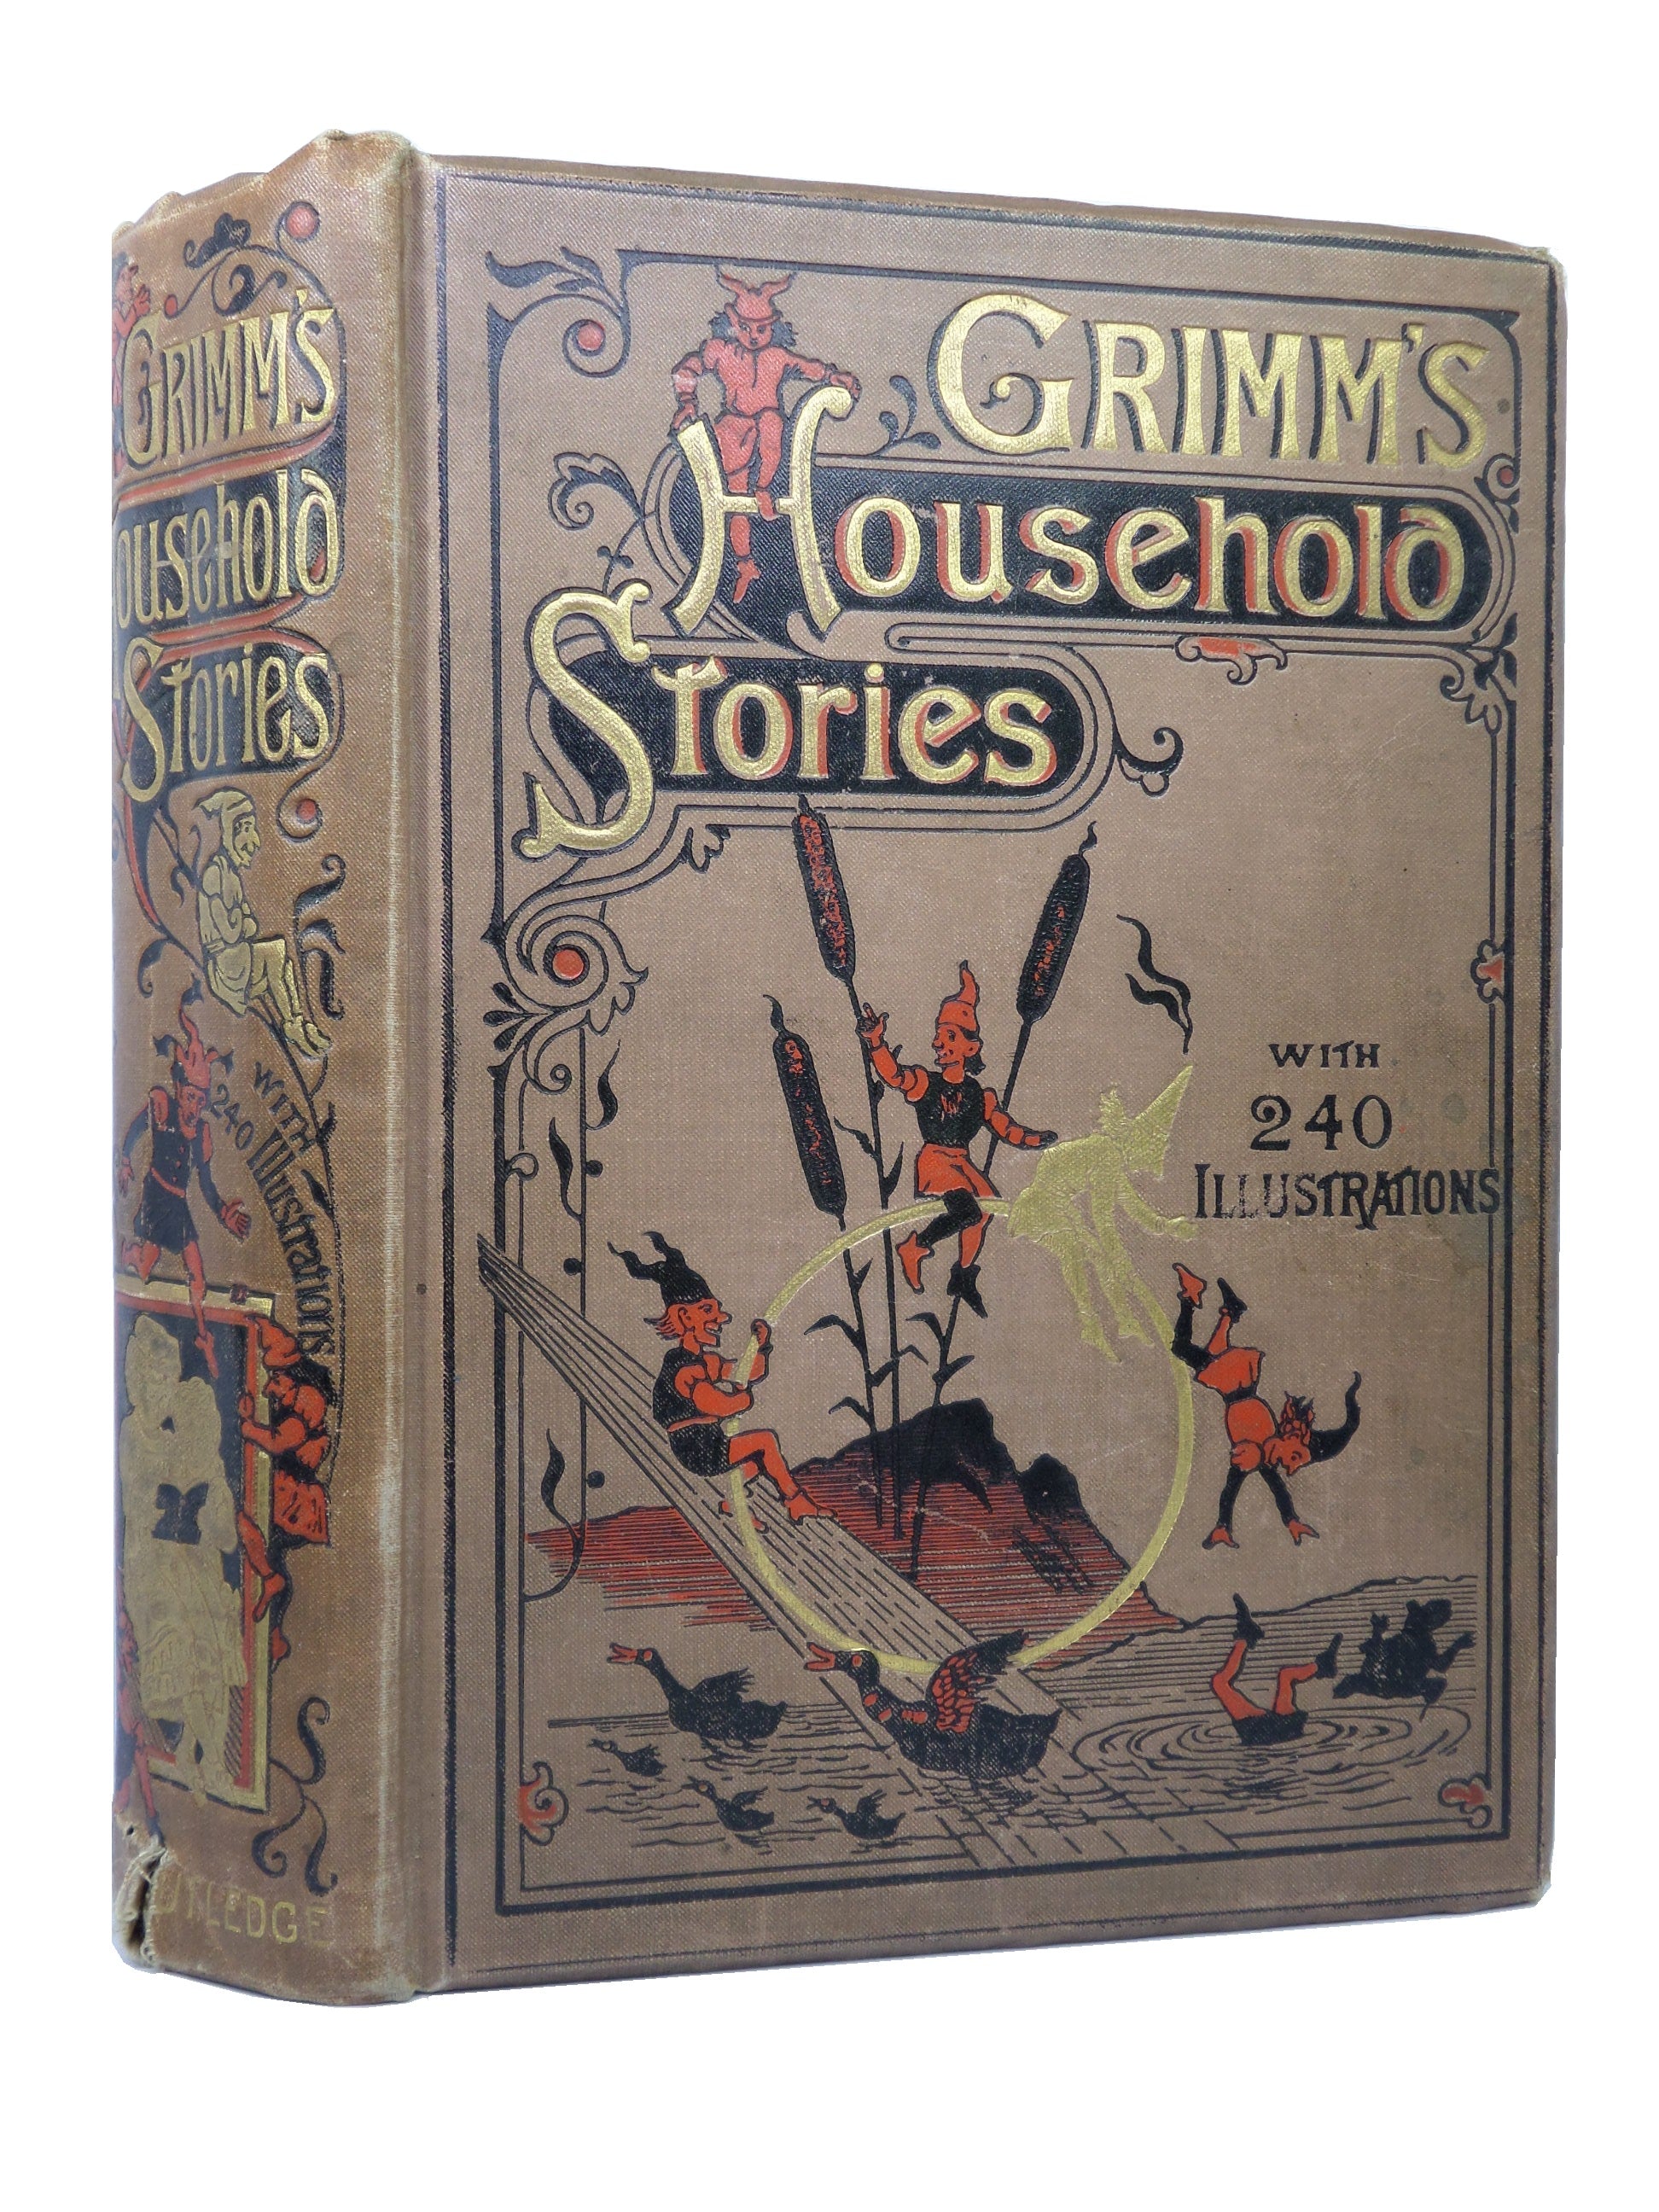 HOUSEHOLD STORIES COLLECTED BY THE BROTHERS GRIMM 1900 E. H. WEHNERT ILLUSTRATIONS